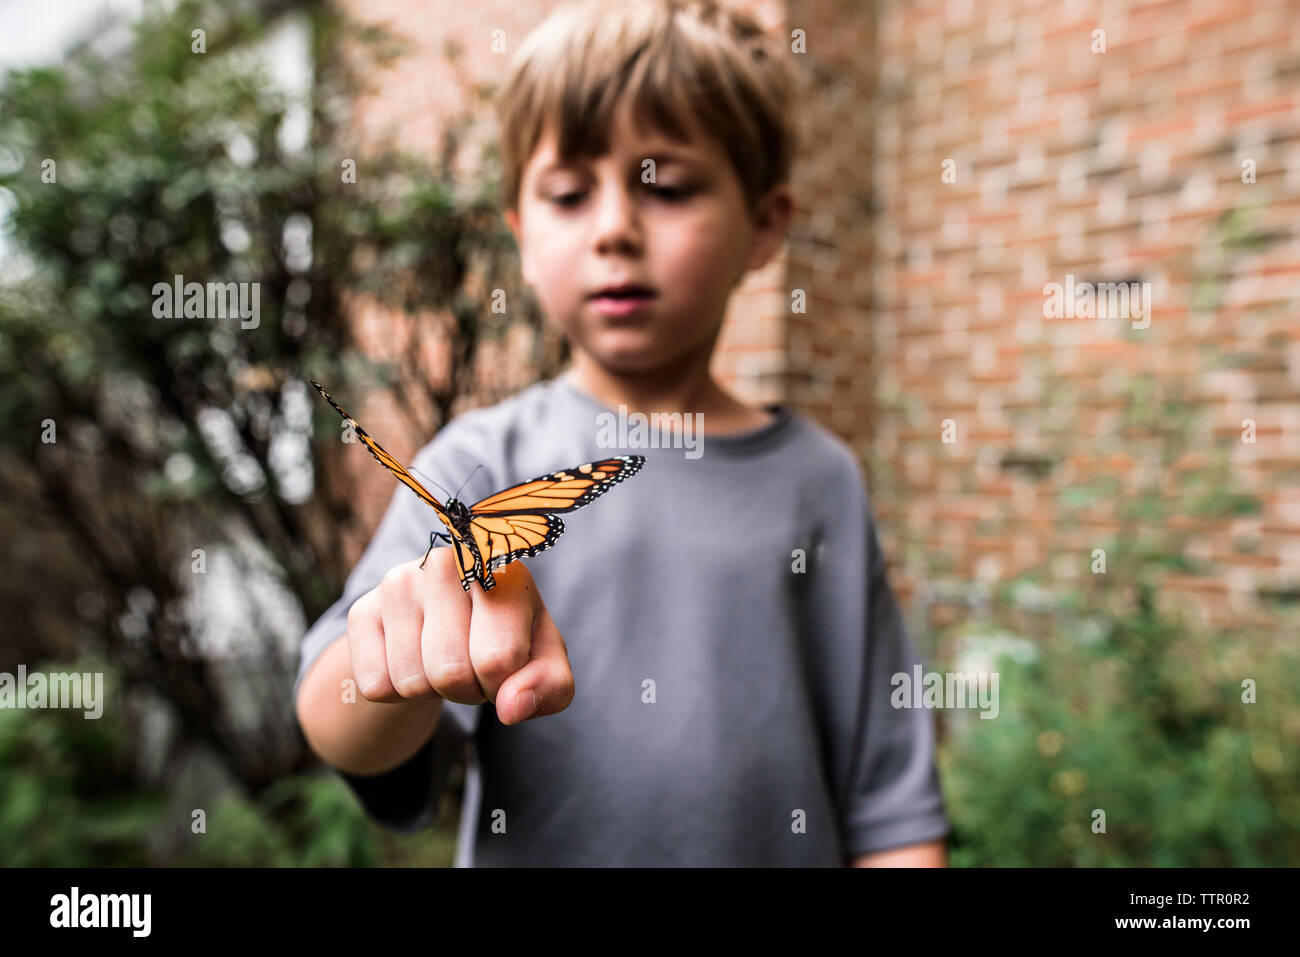 Monarch butterfly sitting on boy's hand as he looks on in wonder Stock Photo